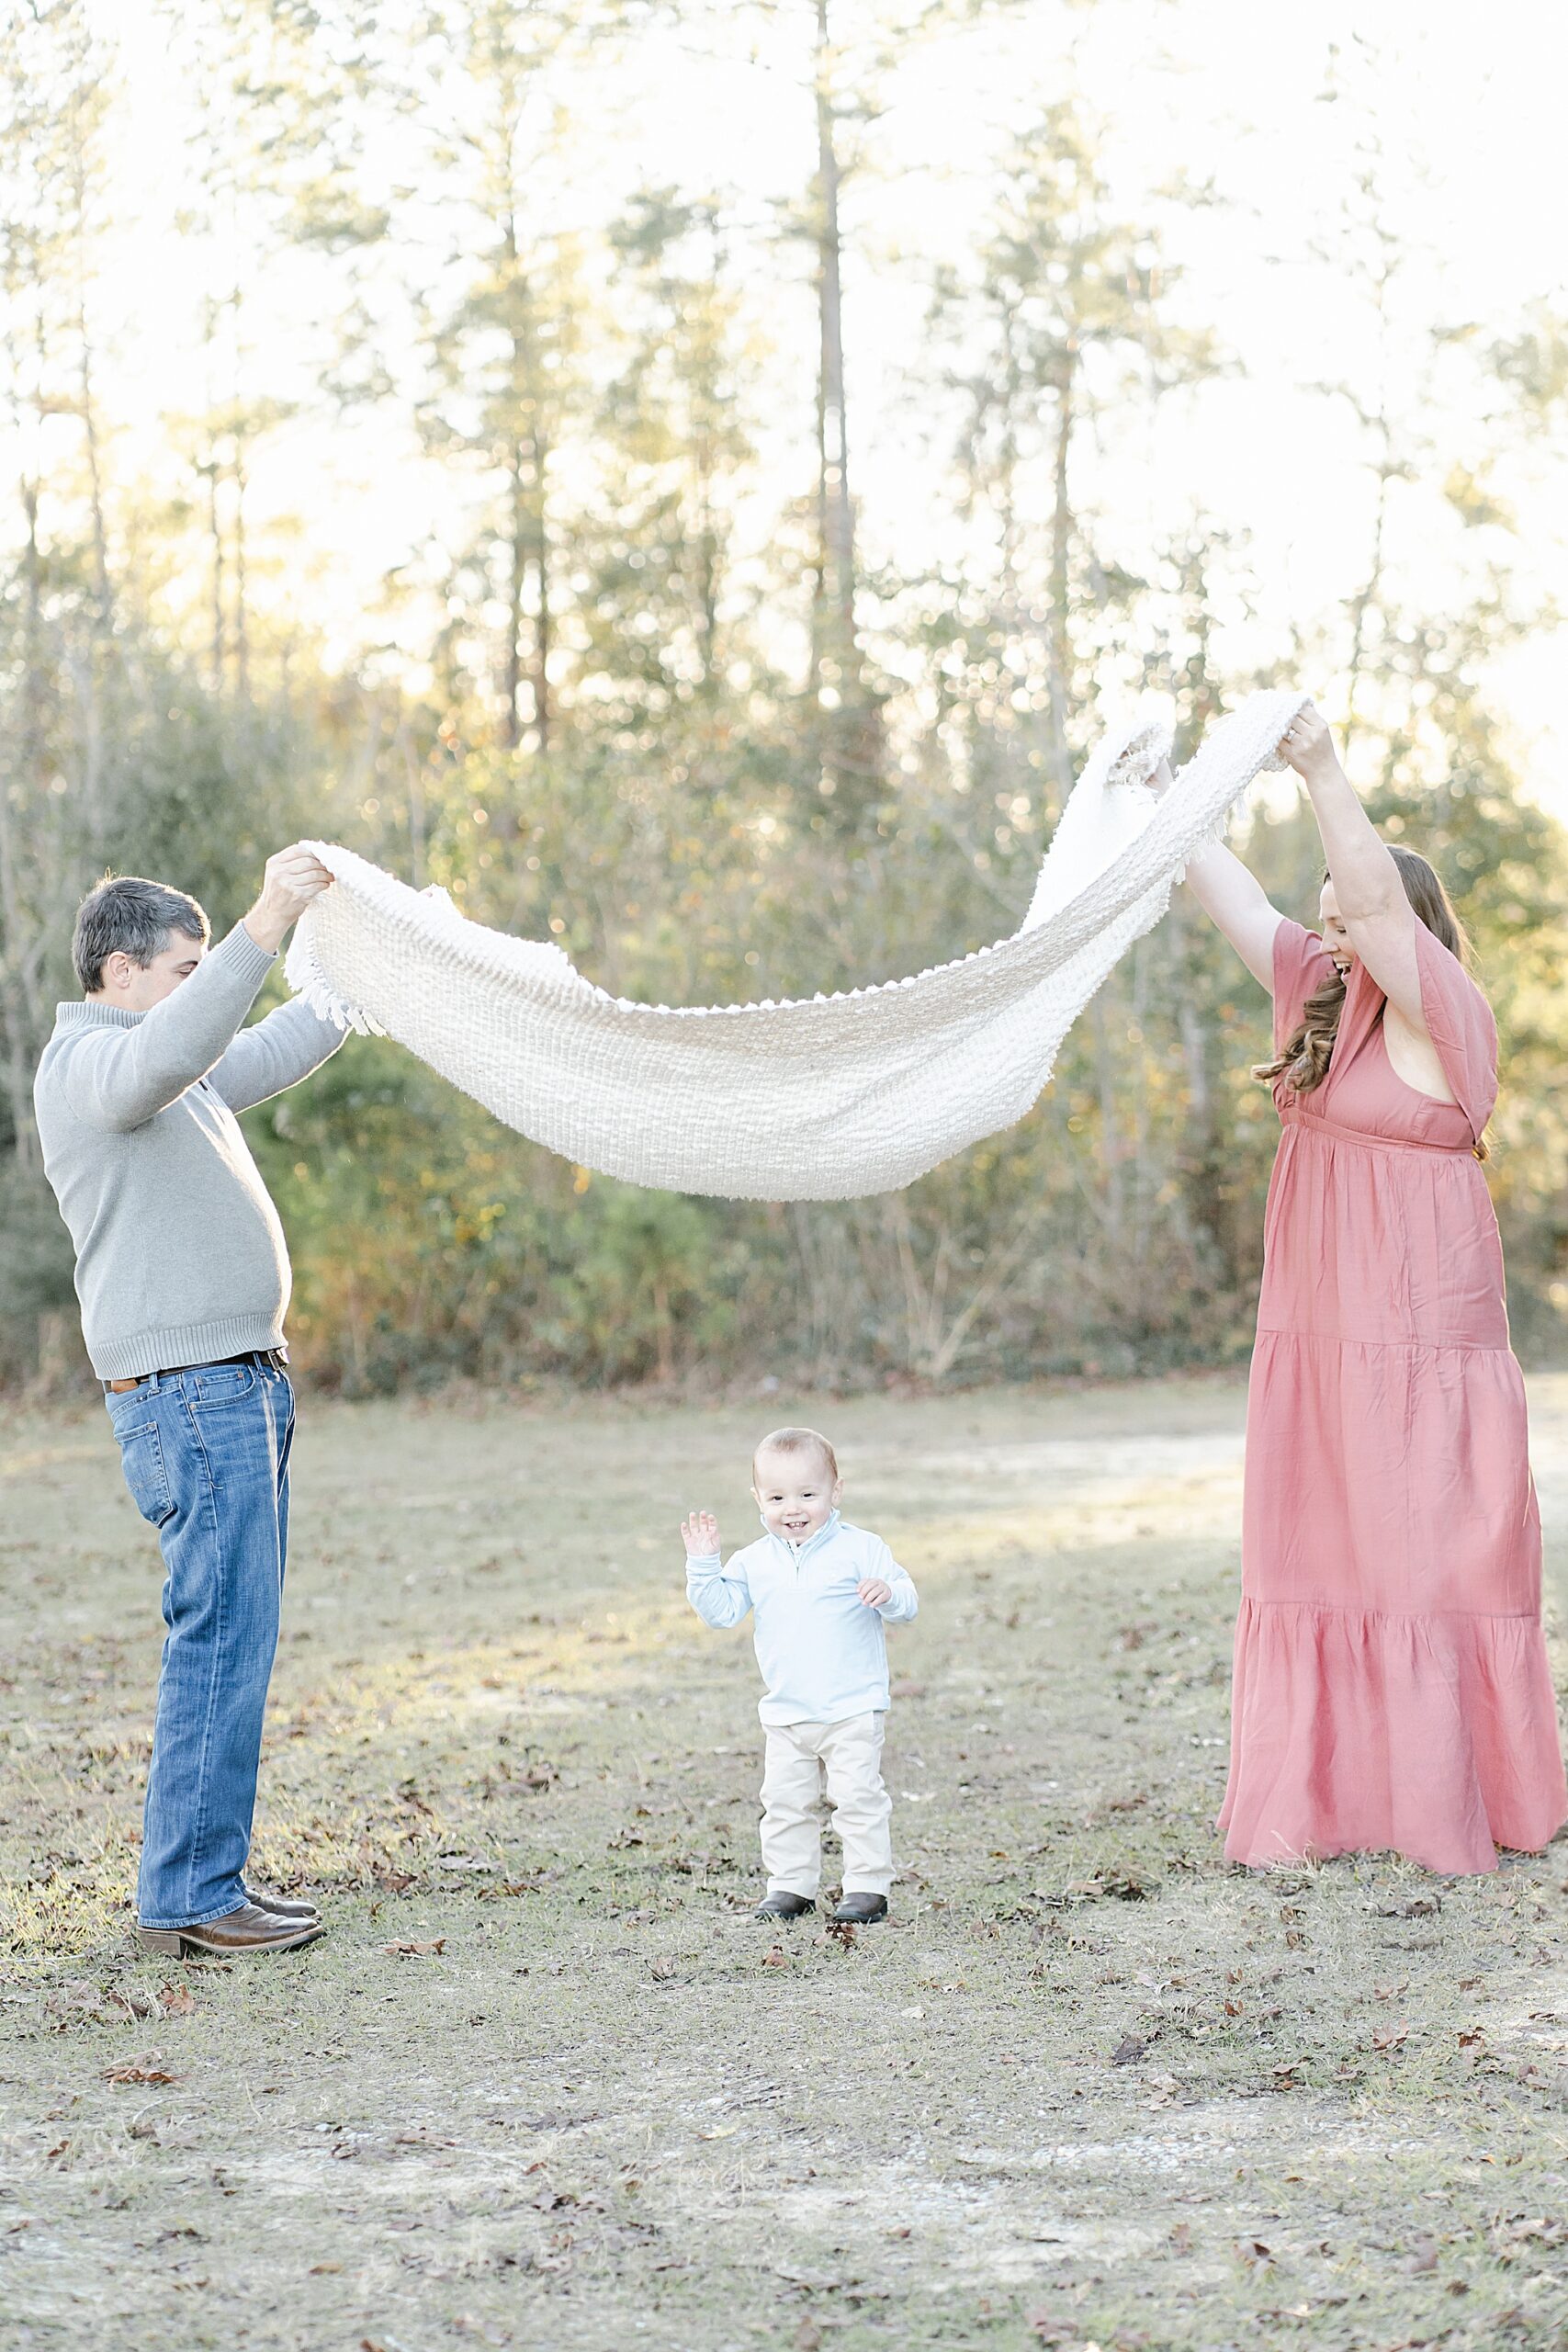 A one year old boy stands playfully under a blanket with his parents during a family session. Photo by Emily Lofton Photography.